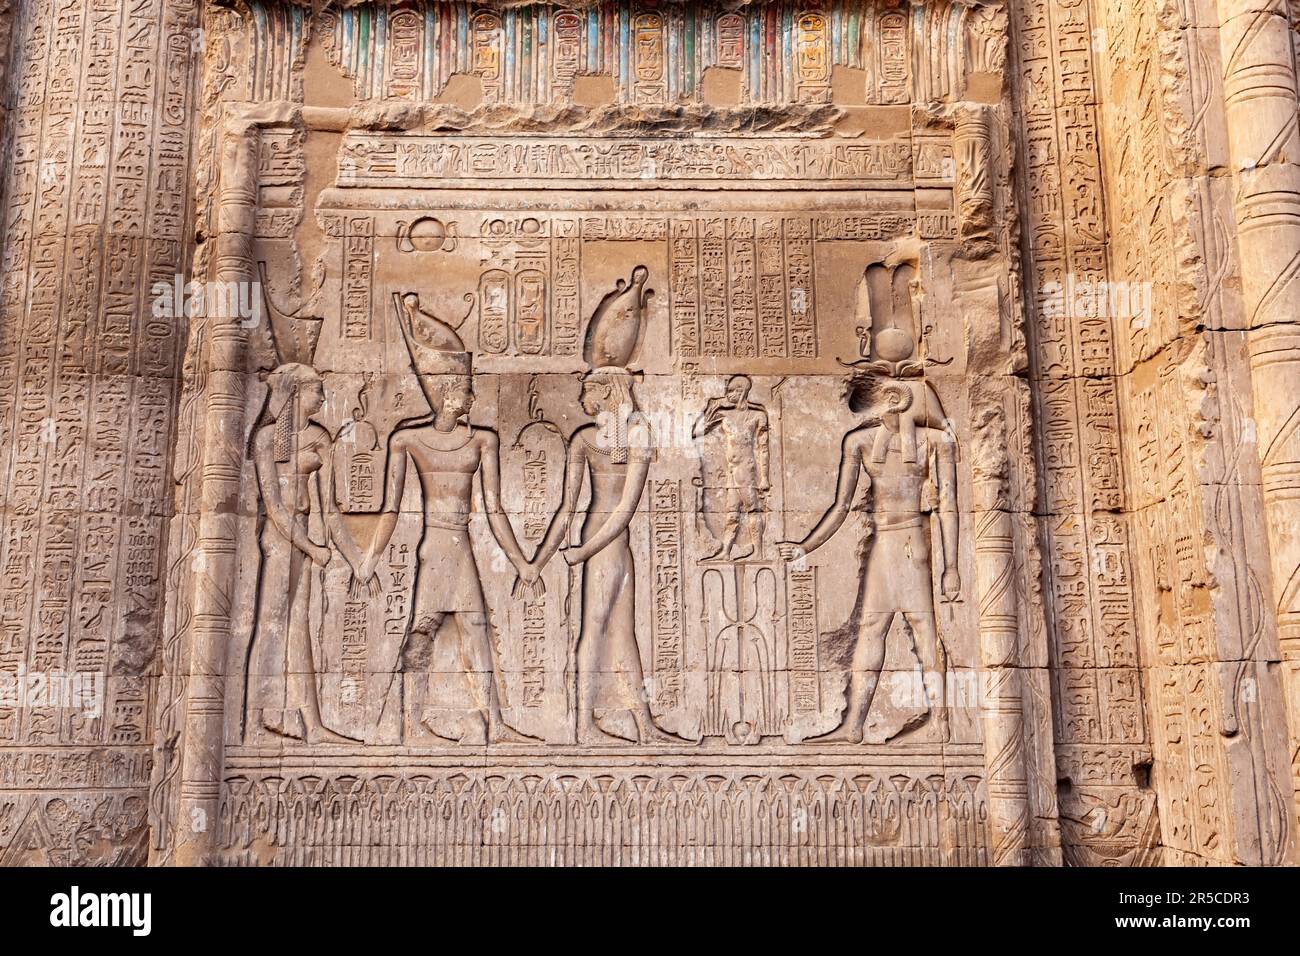 Wall relief at the Temple of Khnum (The Ram Headed Egyptian God) in Esna, Upper Egypt Stock Photo